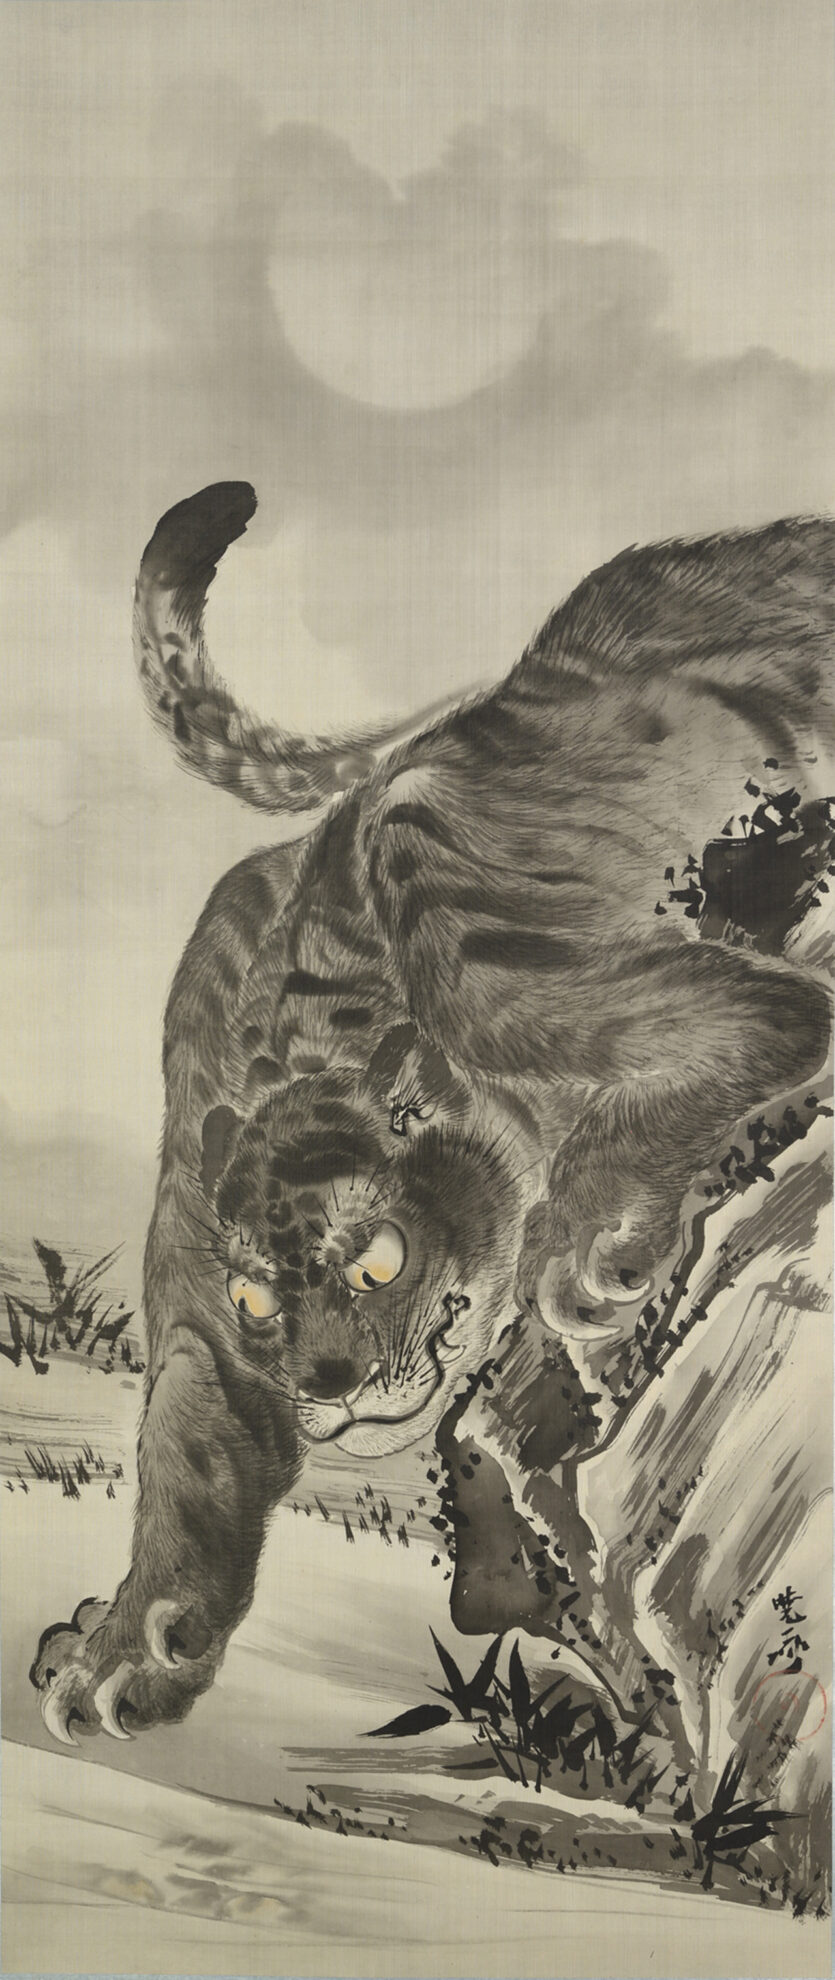 Kawanabe Kyōsai, Tiger Looking at Its Reflection in Moonlight, 1871-89. Hanging scroll: ink and gold on silk, 128.6 x 54.2 cm. Israel Goldman Collection, London. Photo: Art Research Center, Ritsumeikan University